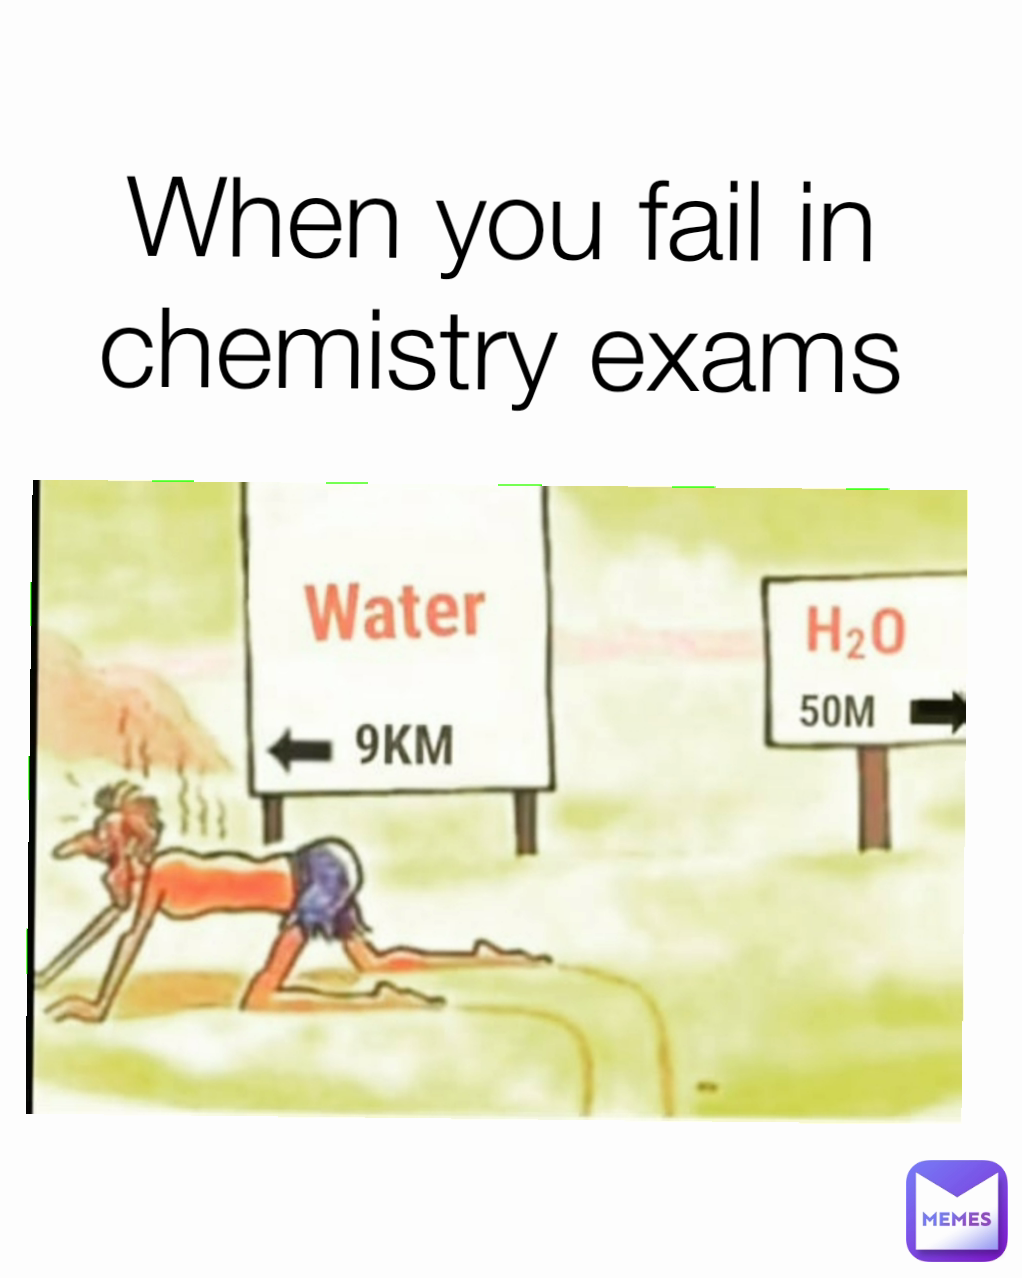 When you fail in chemistry exams